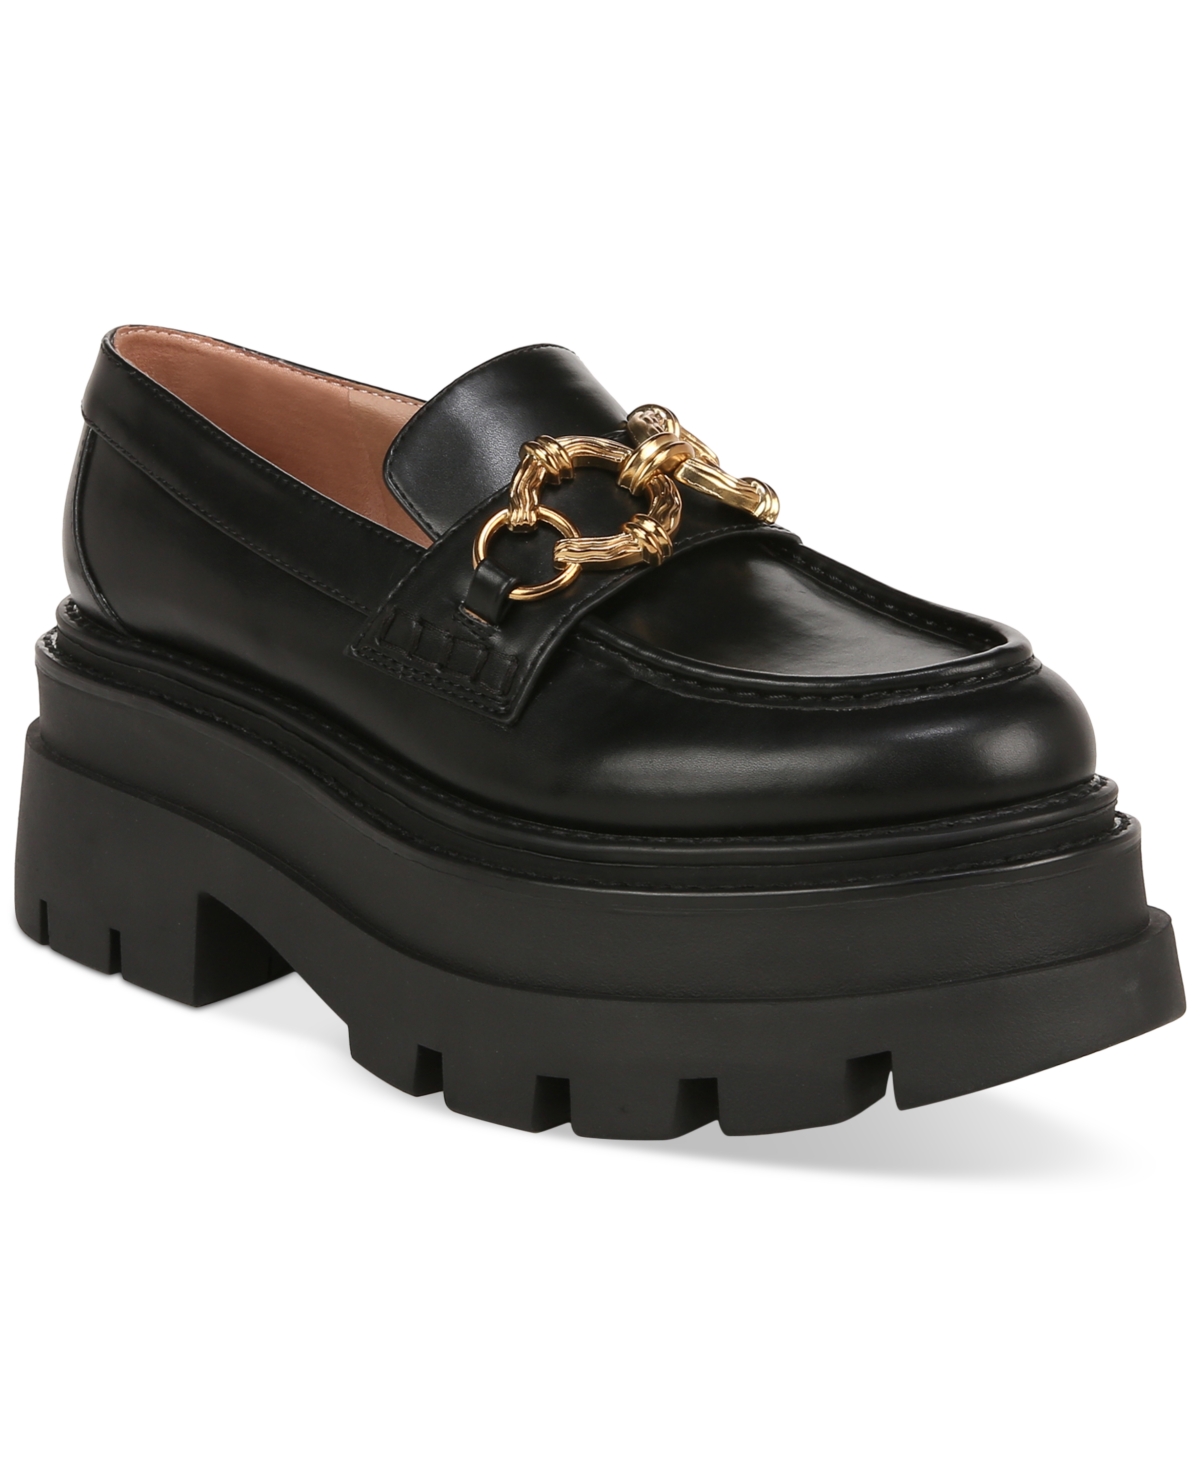 Circus Ny Women's Brooklyn Platform Tailored Platform Loafers In Black